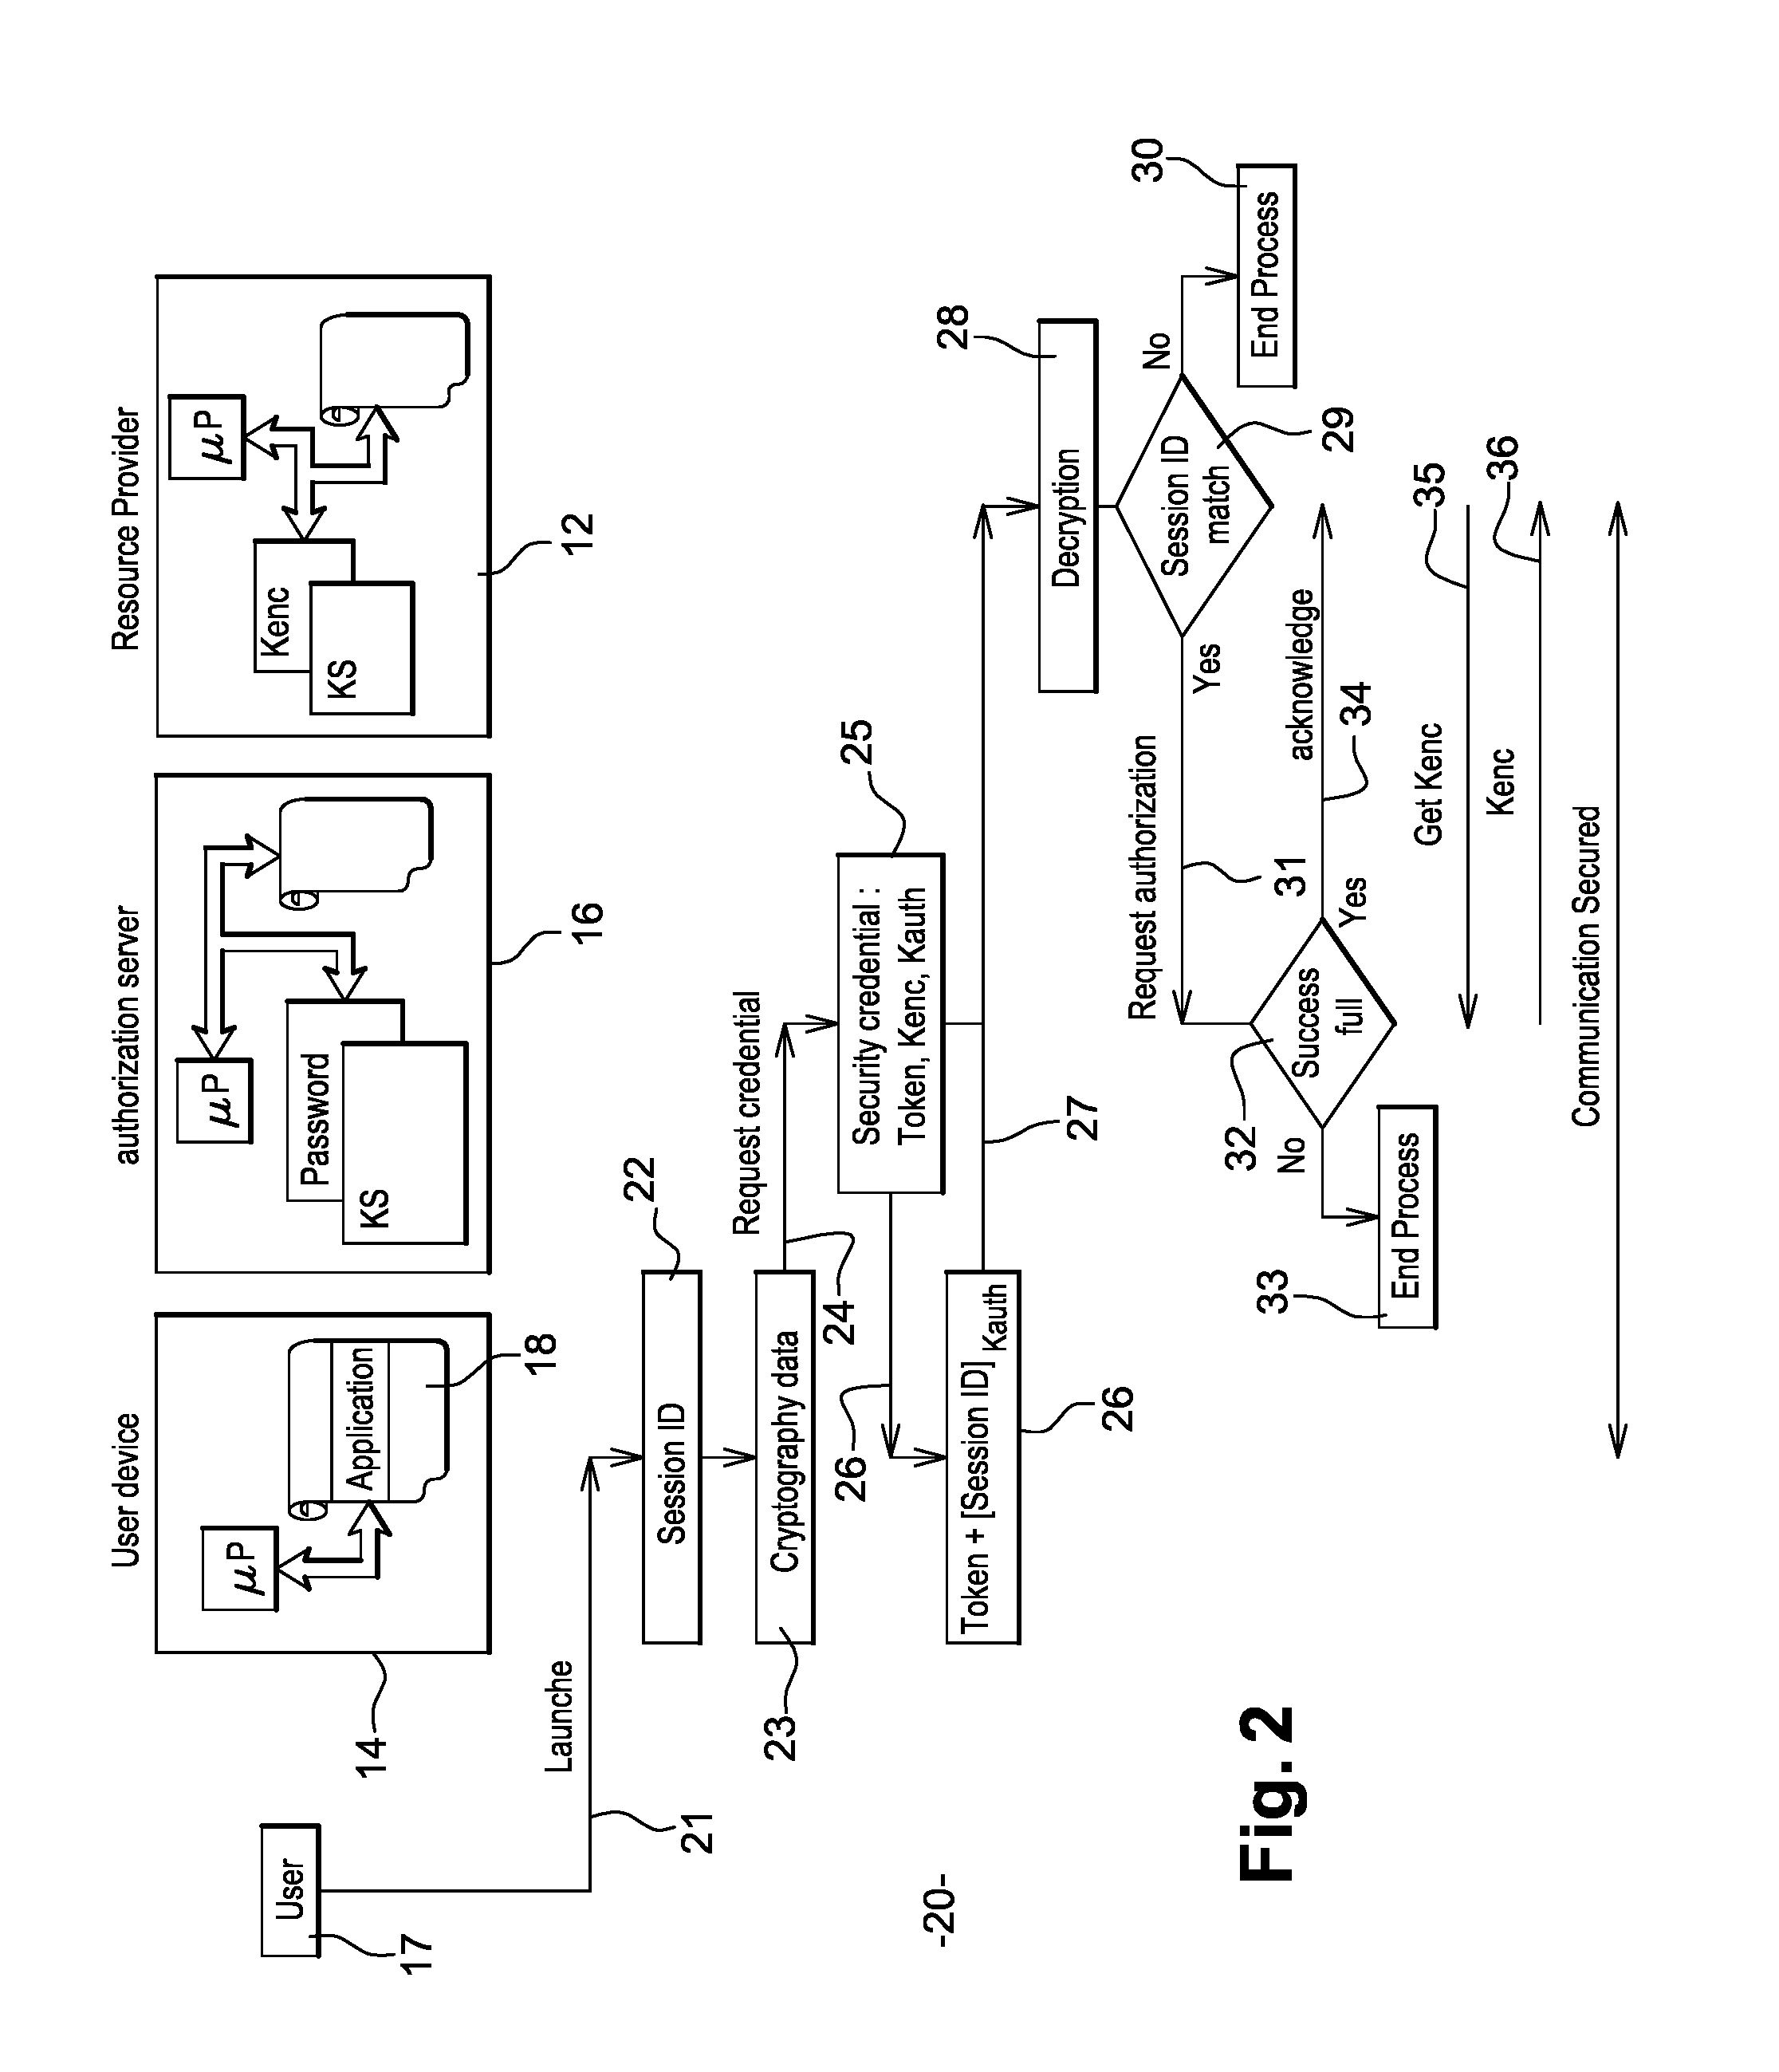 System and method for securing machine-to-machine communications